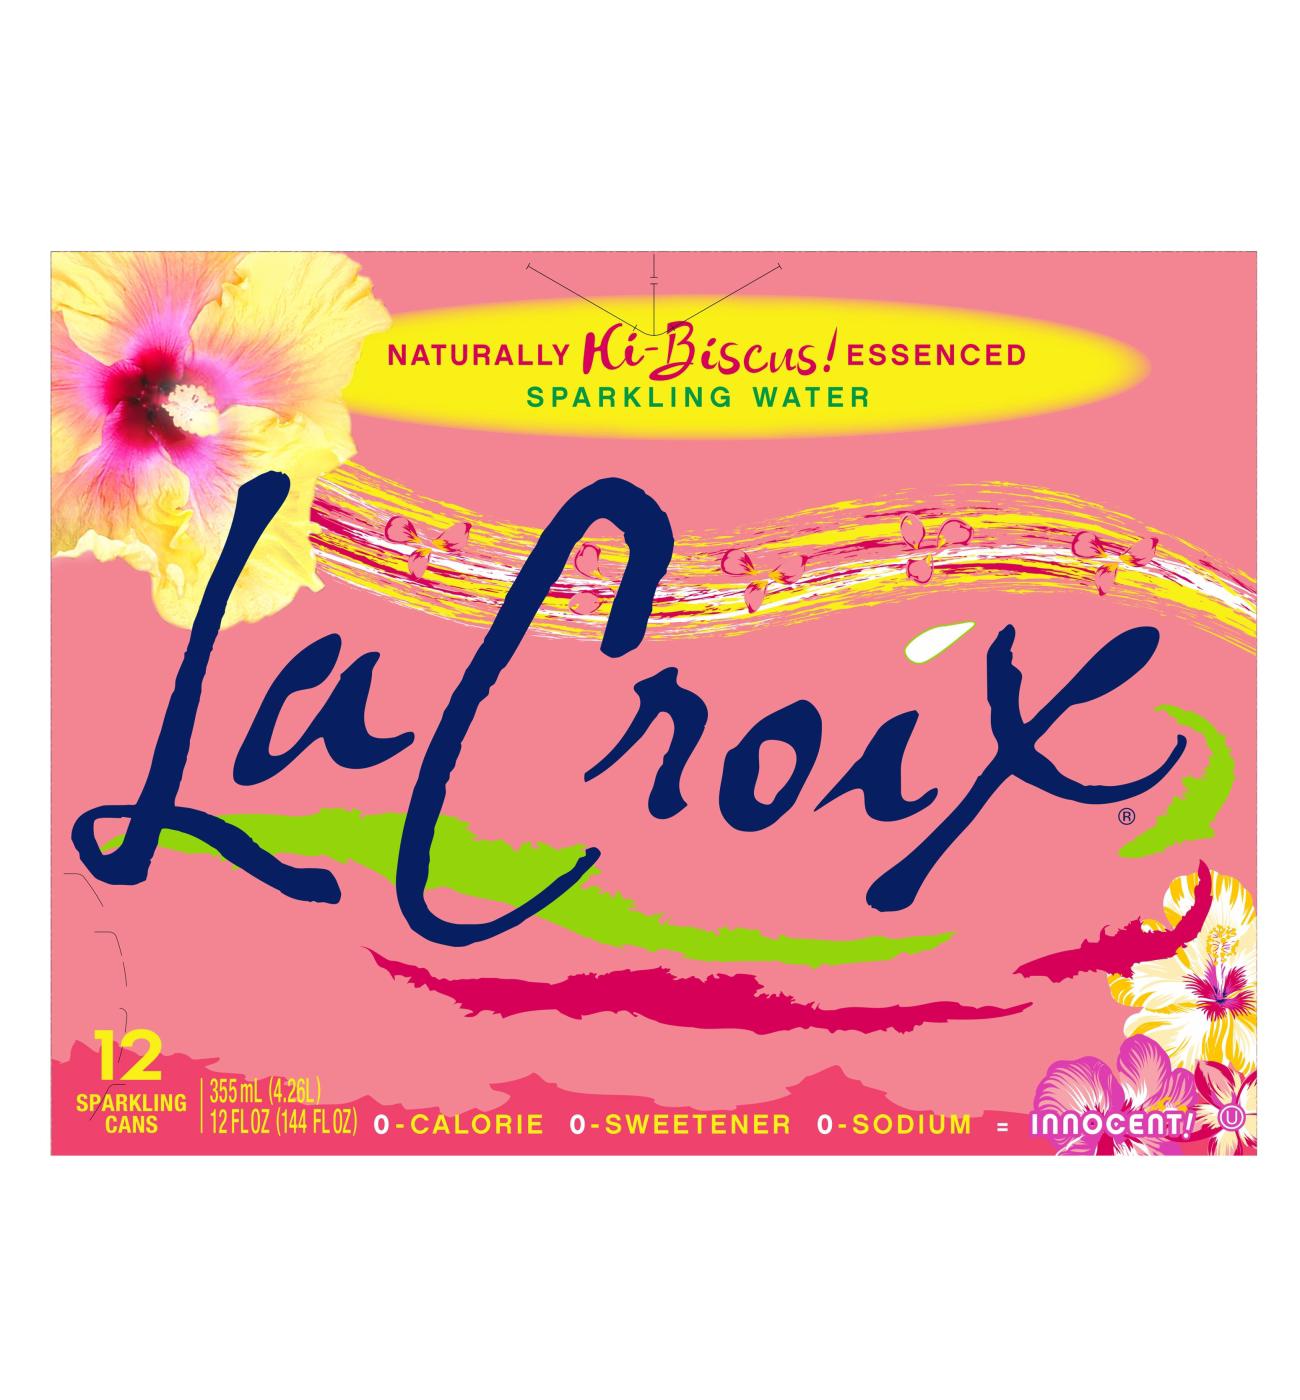 LaCroix Hi-Biscus Sparkling Water 12 oz Cans; image 2 of 2